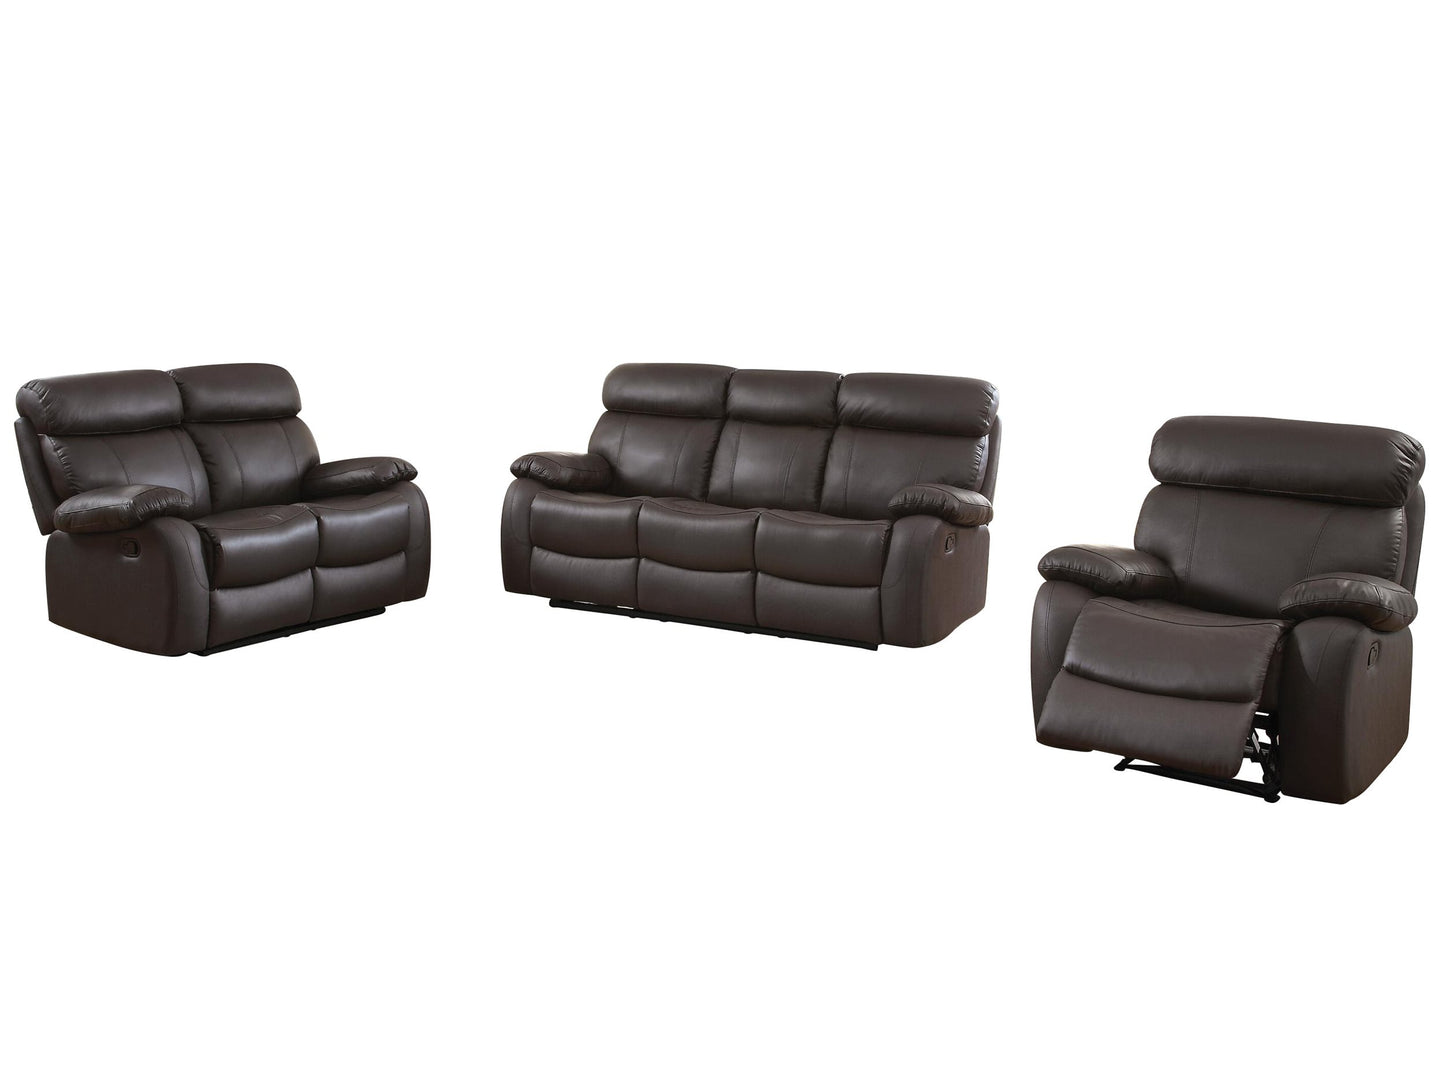 Homelegance Pendu 3PC Double Reclining Sofa, Love Seat & Recliner Chair in Brown Leather